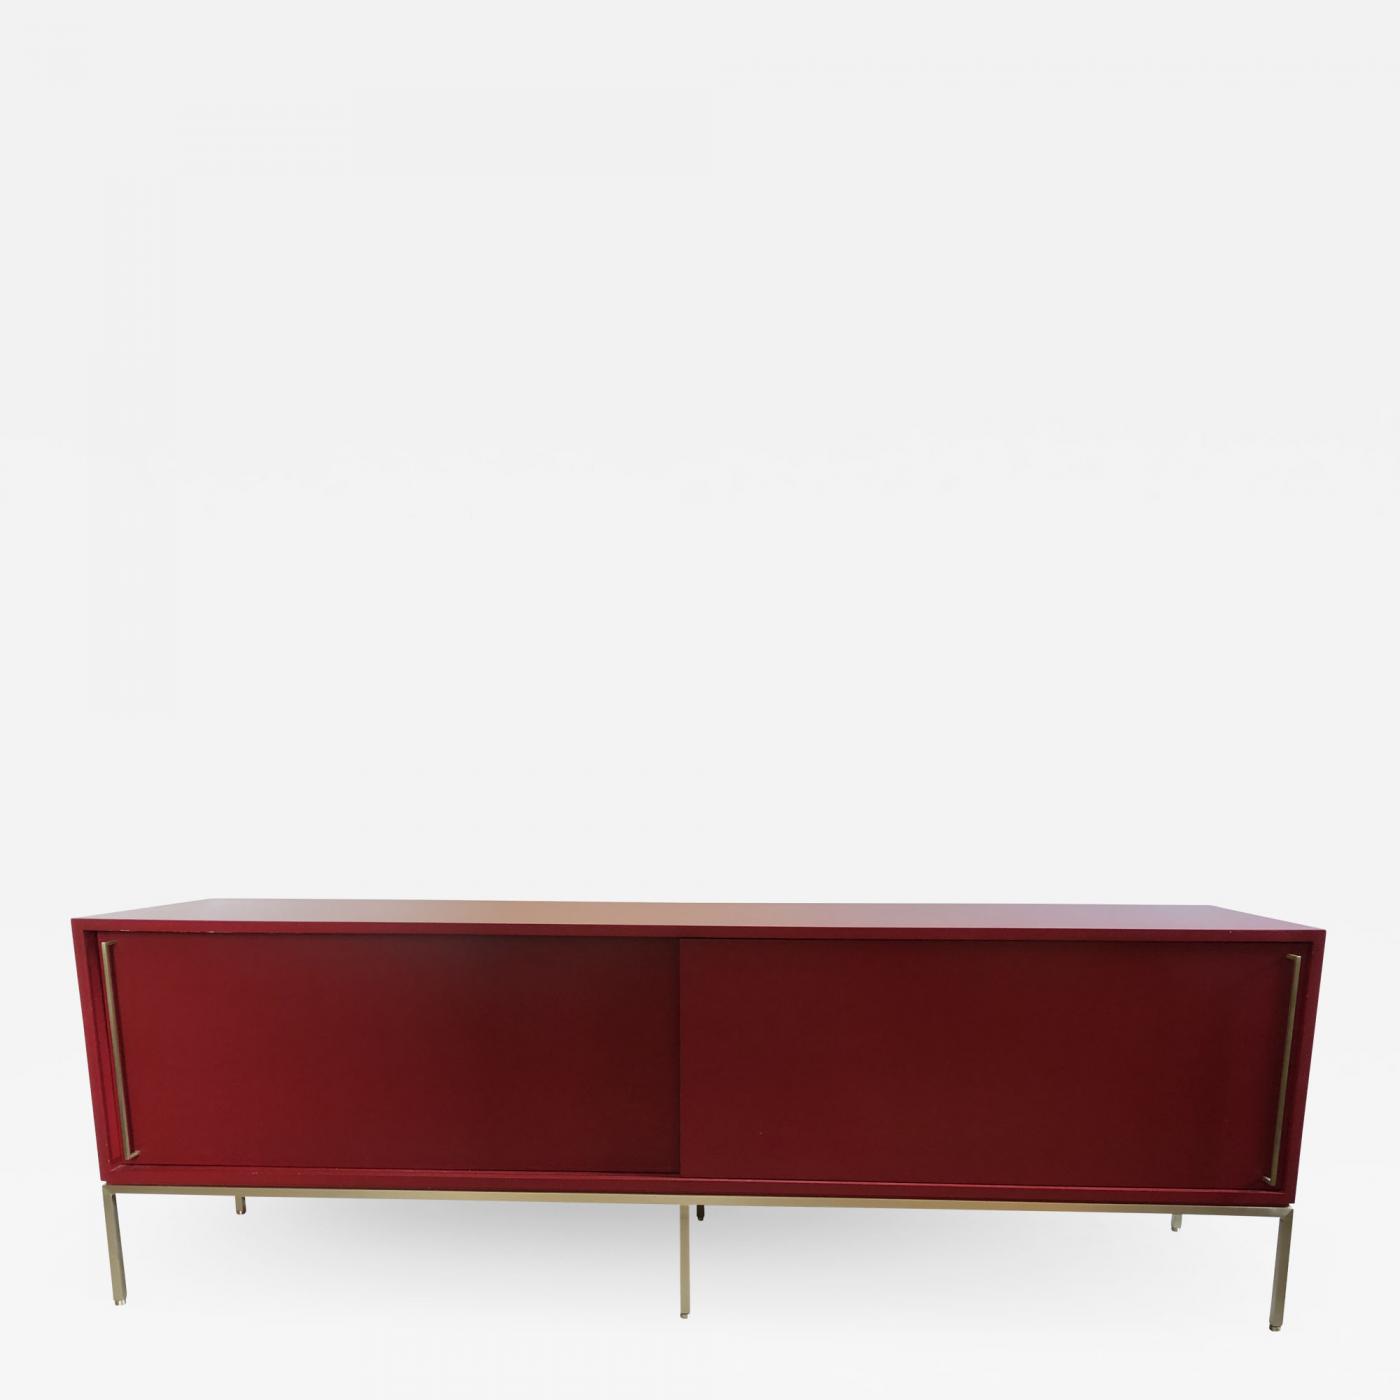 Regeneration Furniture Re 379 Credenza With Red Lacquered Case